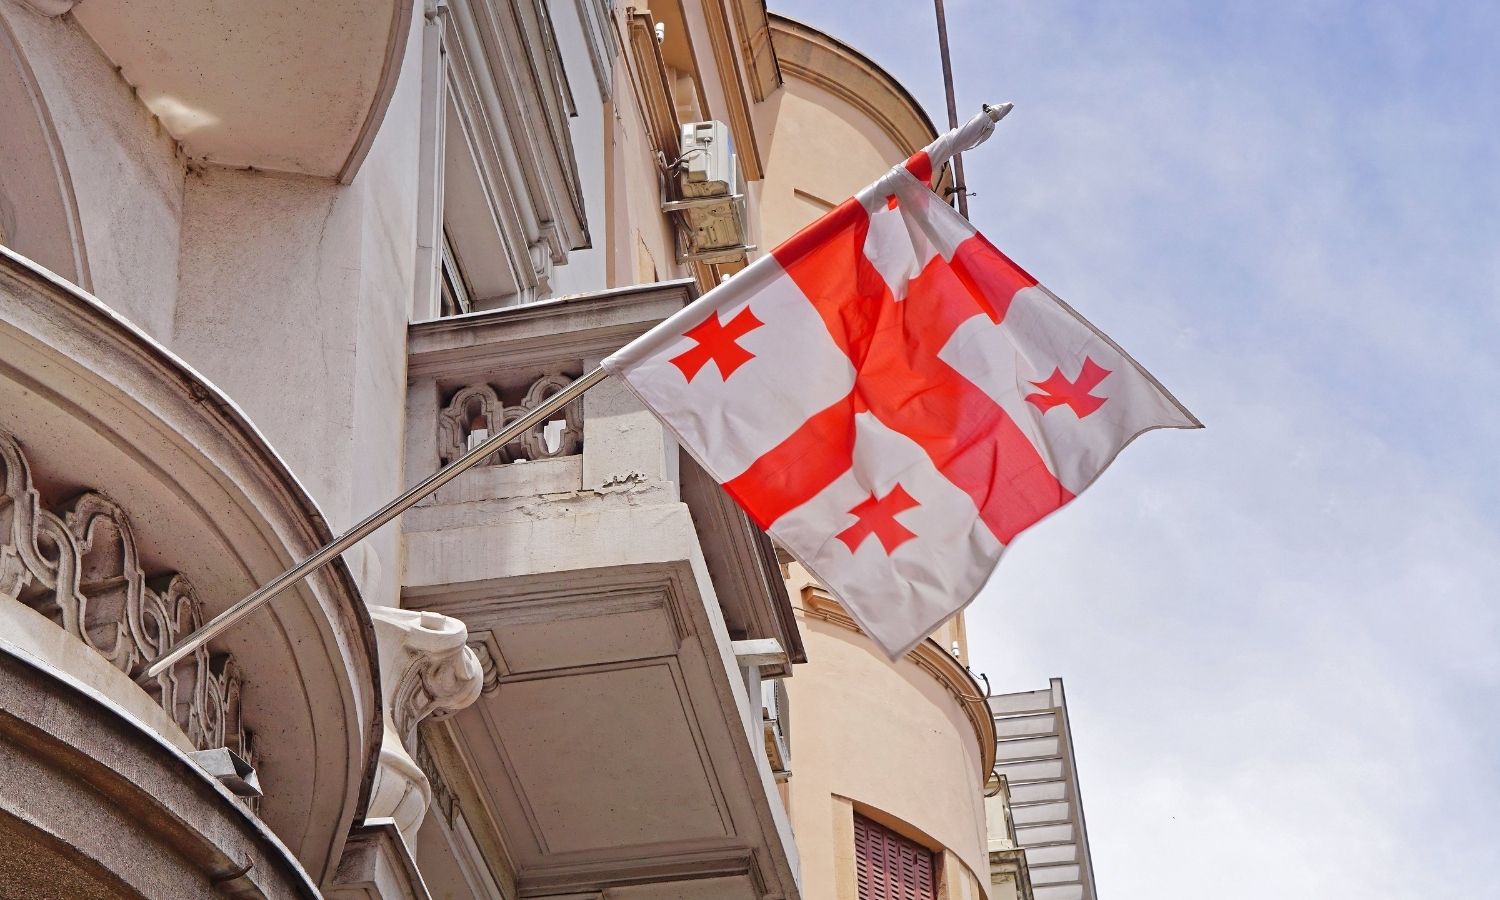 OTD in 2004: The country of Georgia officially adopted the Five Cross Flag after more than five hundred years since its last use.